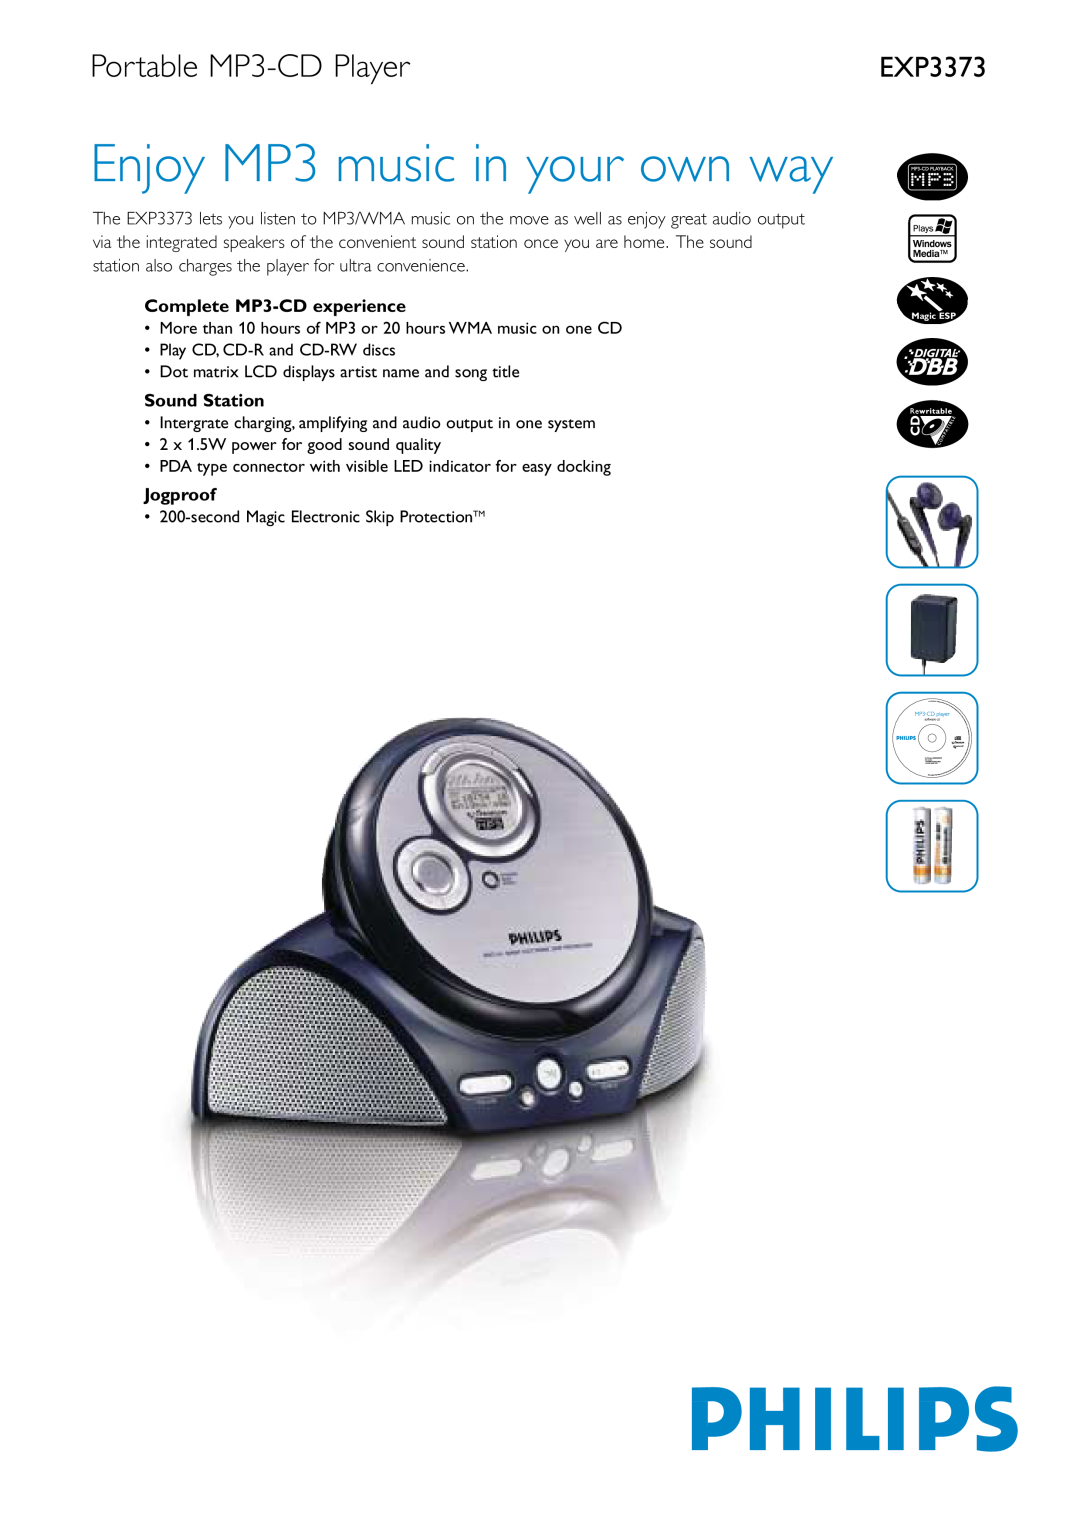 Philips EXP3373 manual Portable MP3-CDPlayer, Complete MP3-CDexperience, Sound Station, Jogproof 